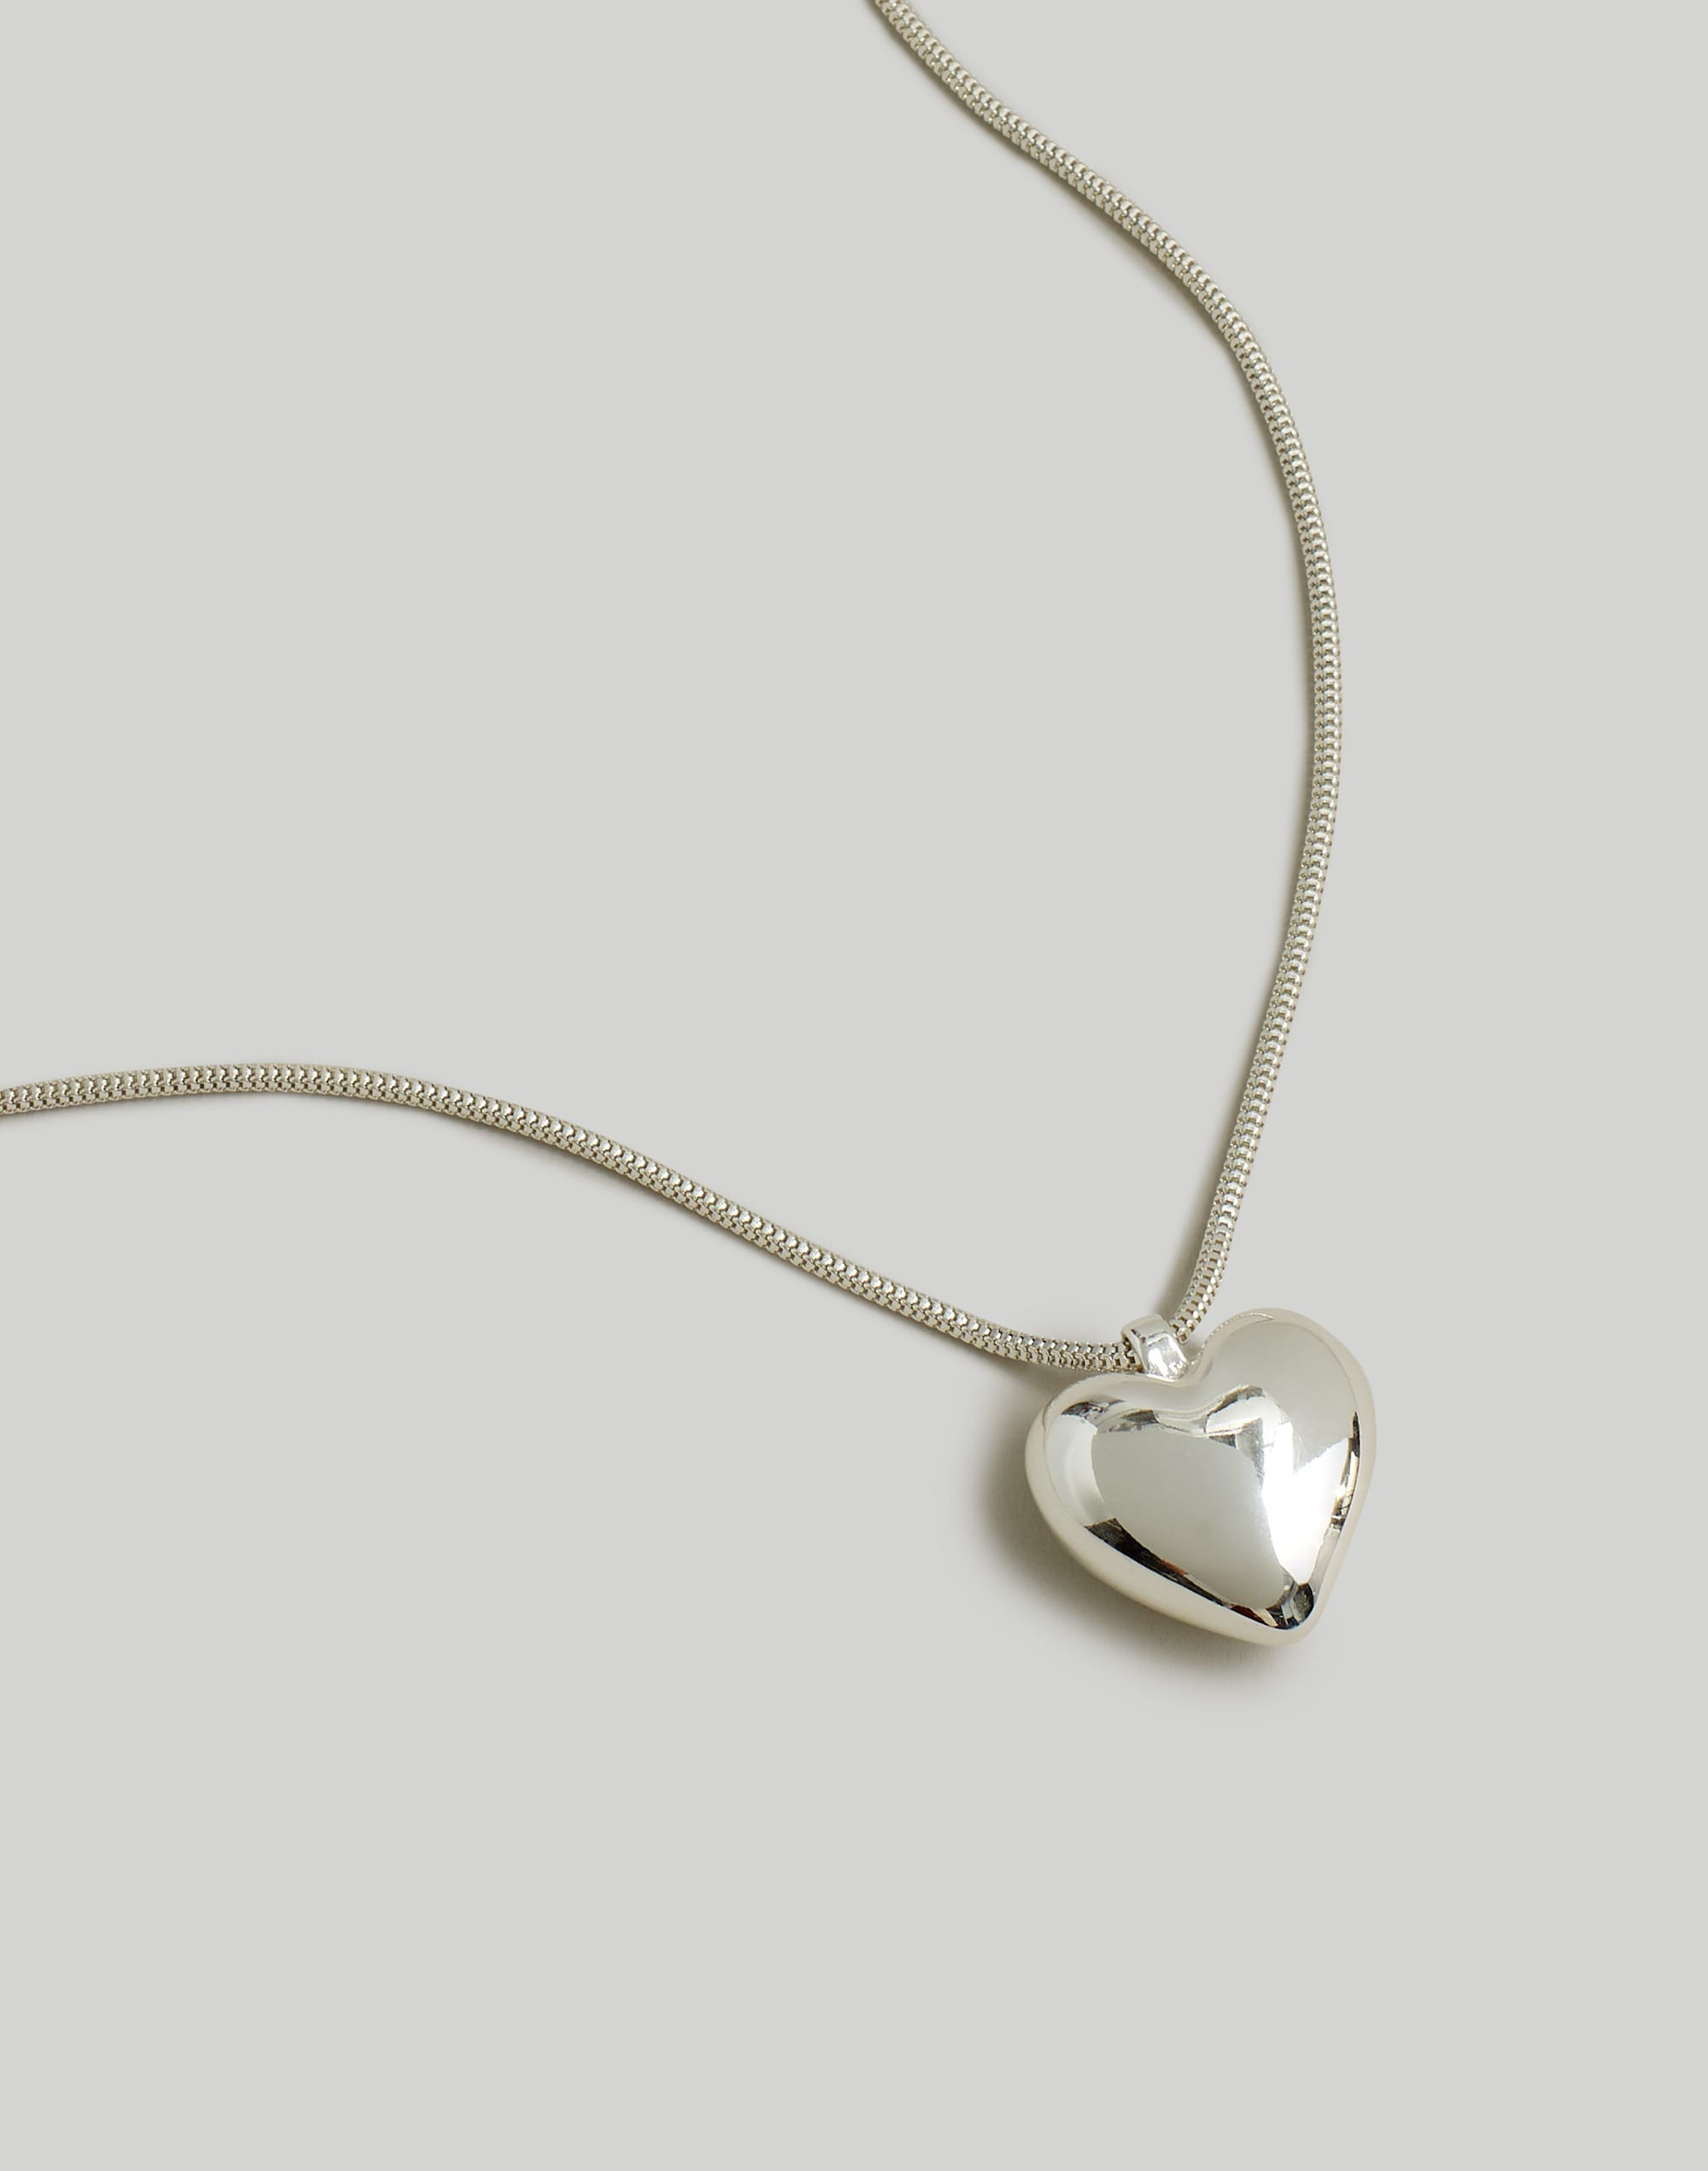 Puffy Heart Pendant Necklace